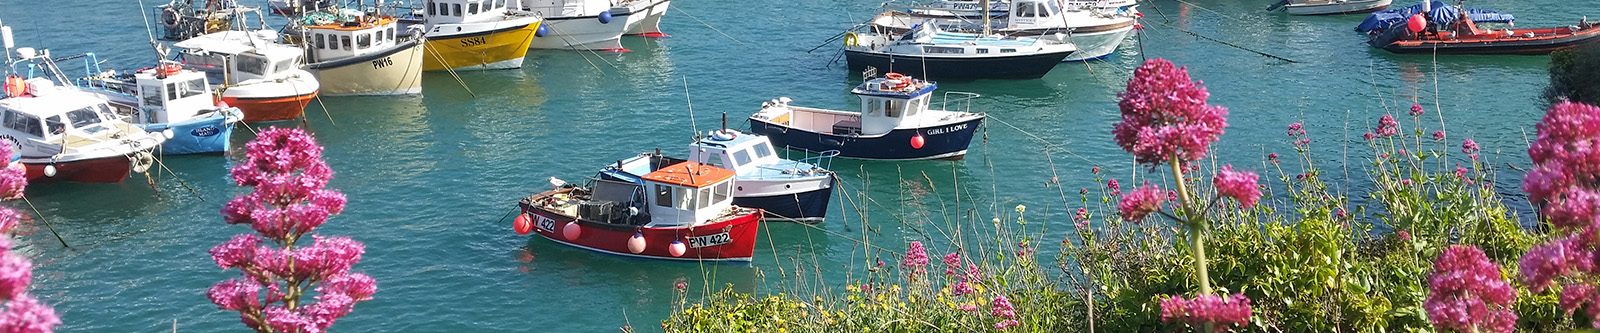 Newquay harbour and boats